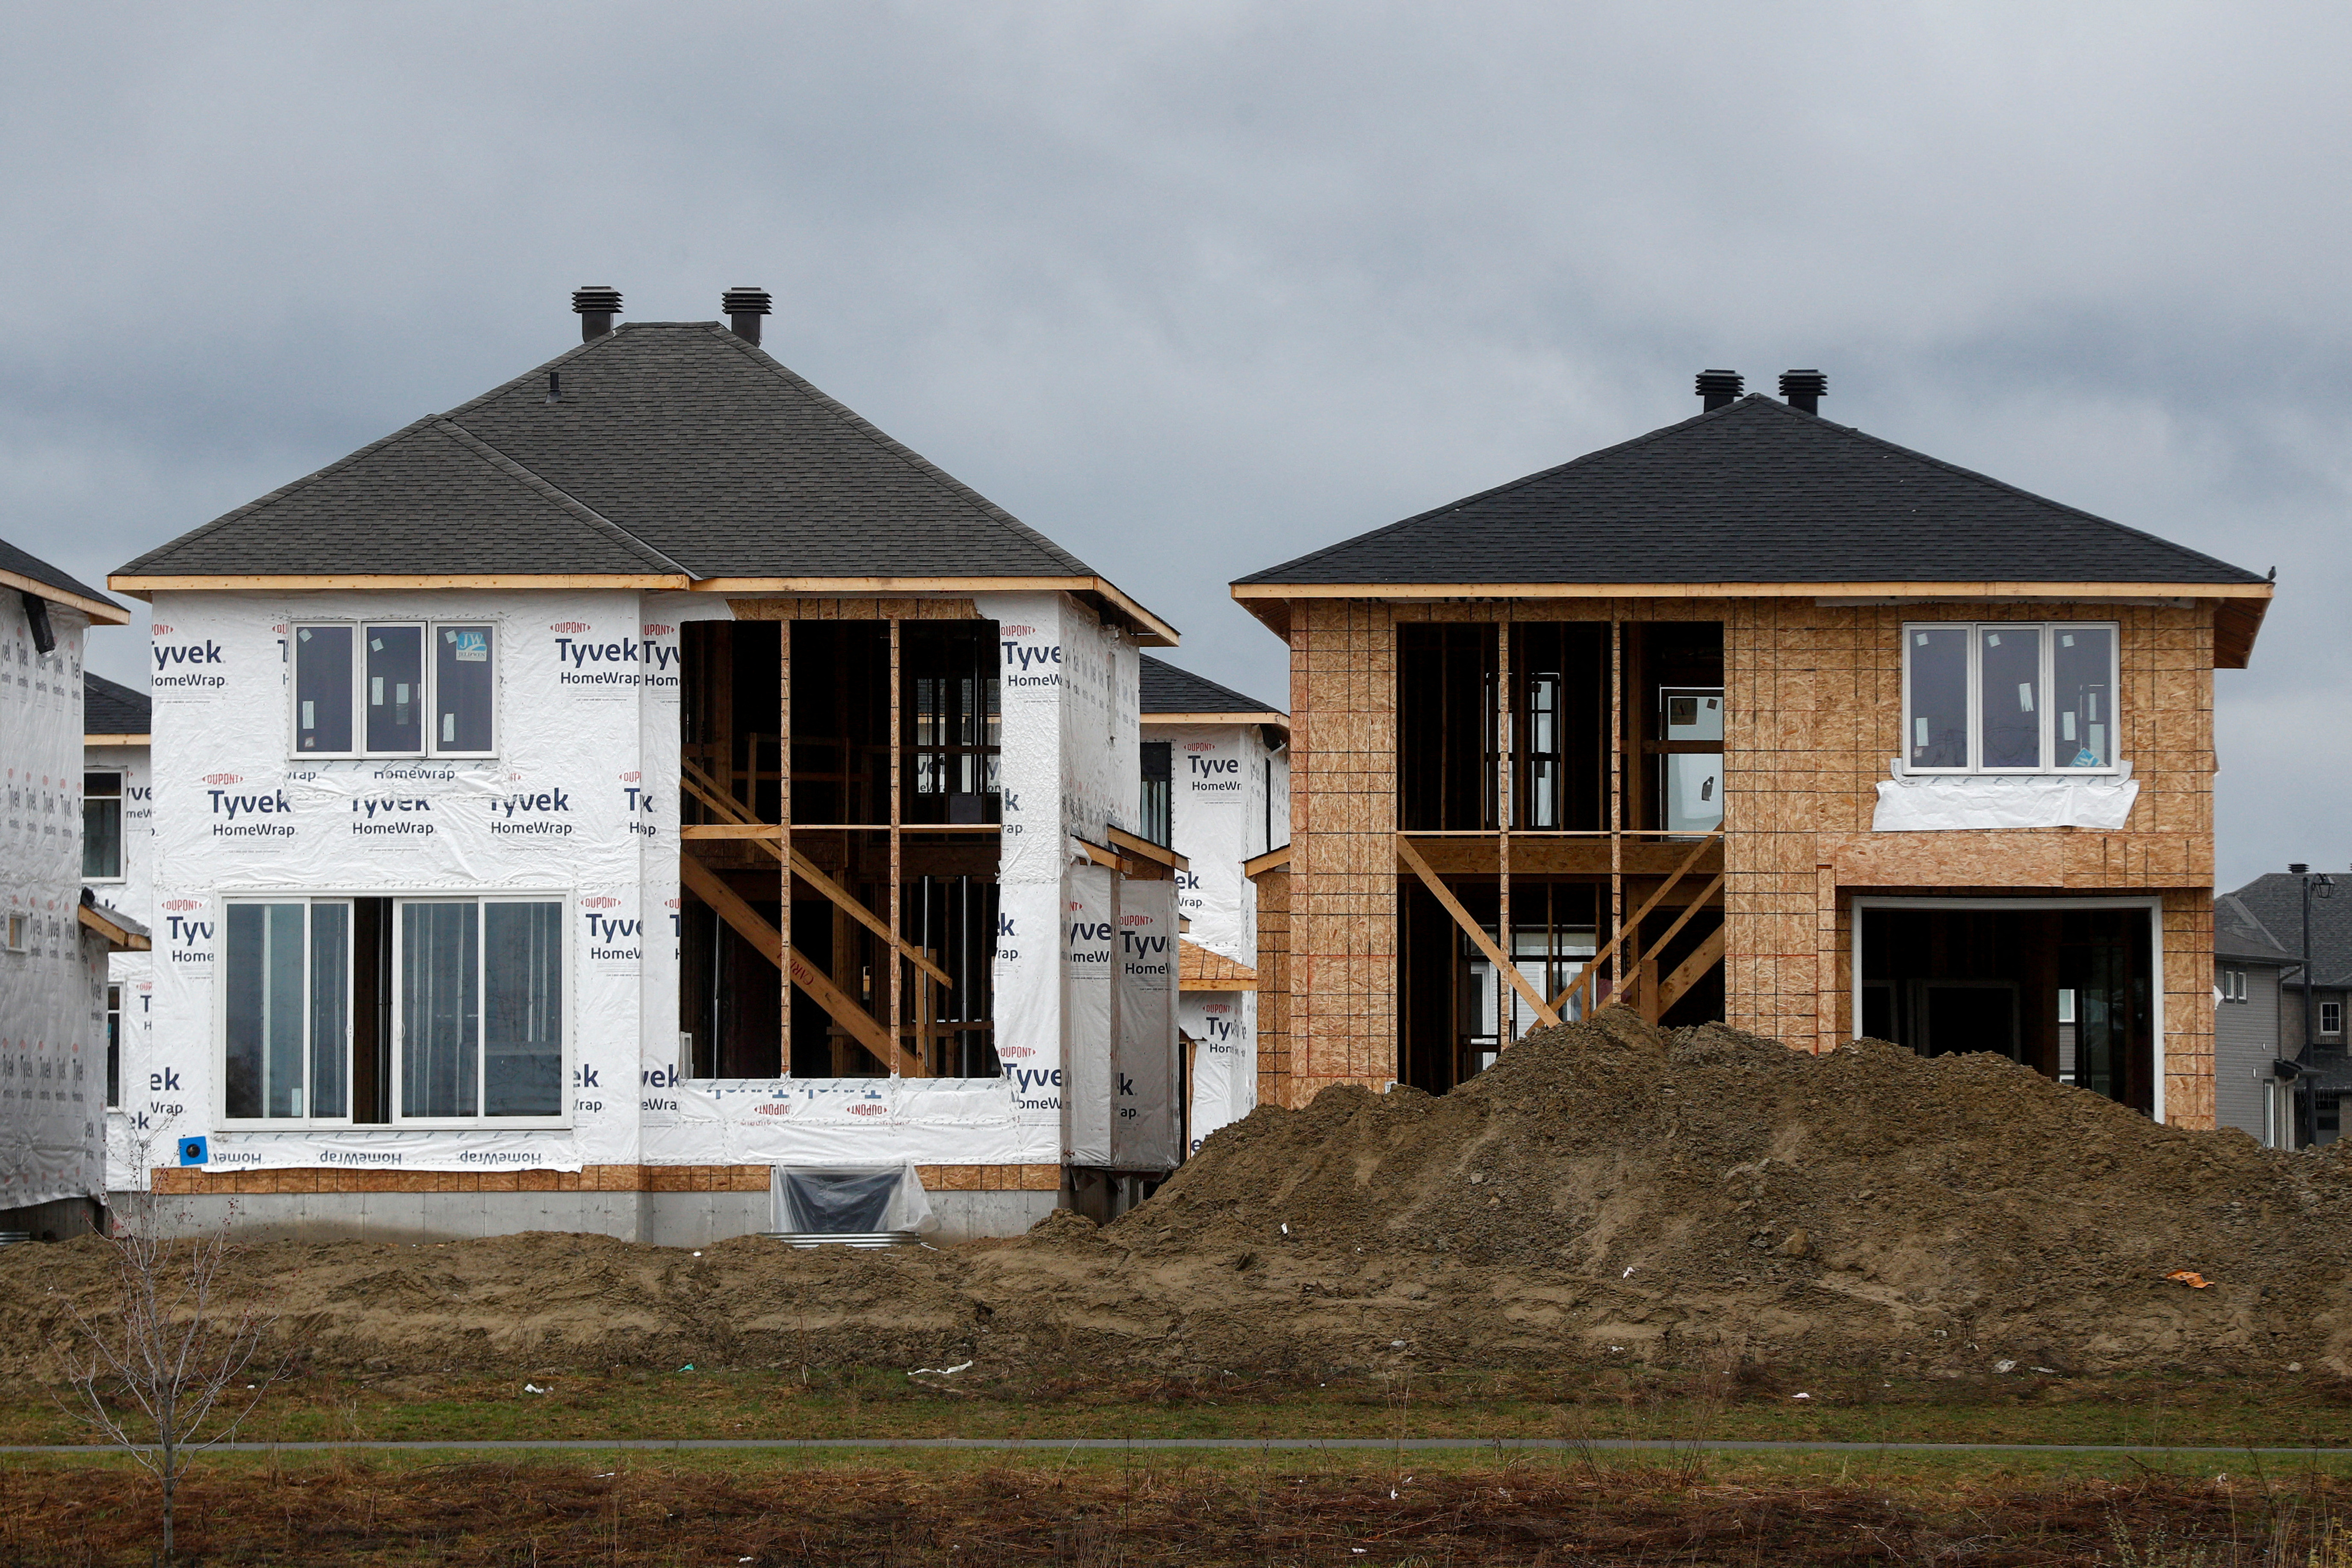 Canada plans incentives to ease housing burden, CBC reports